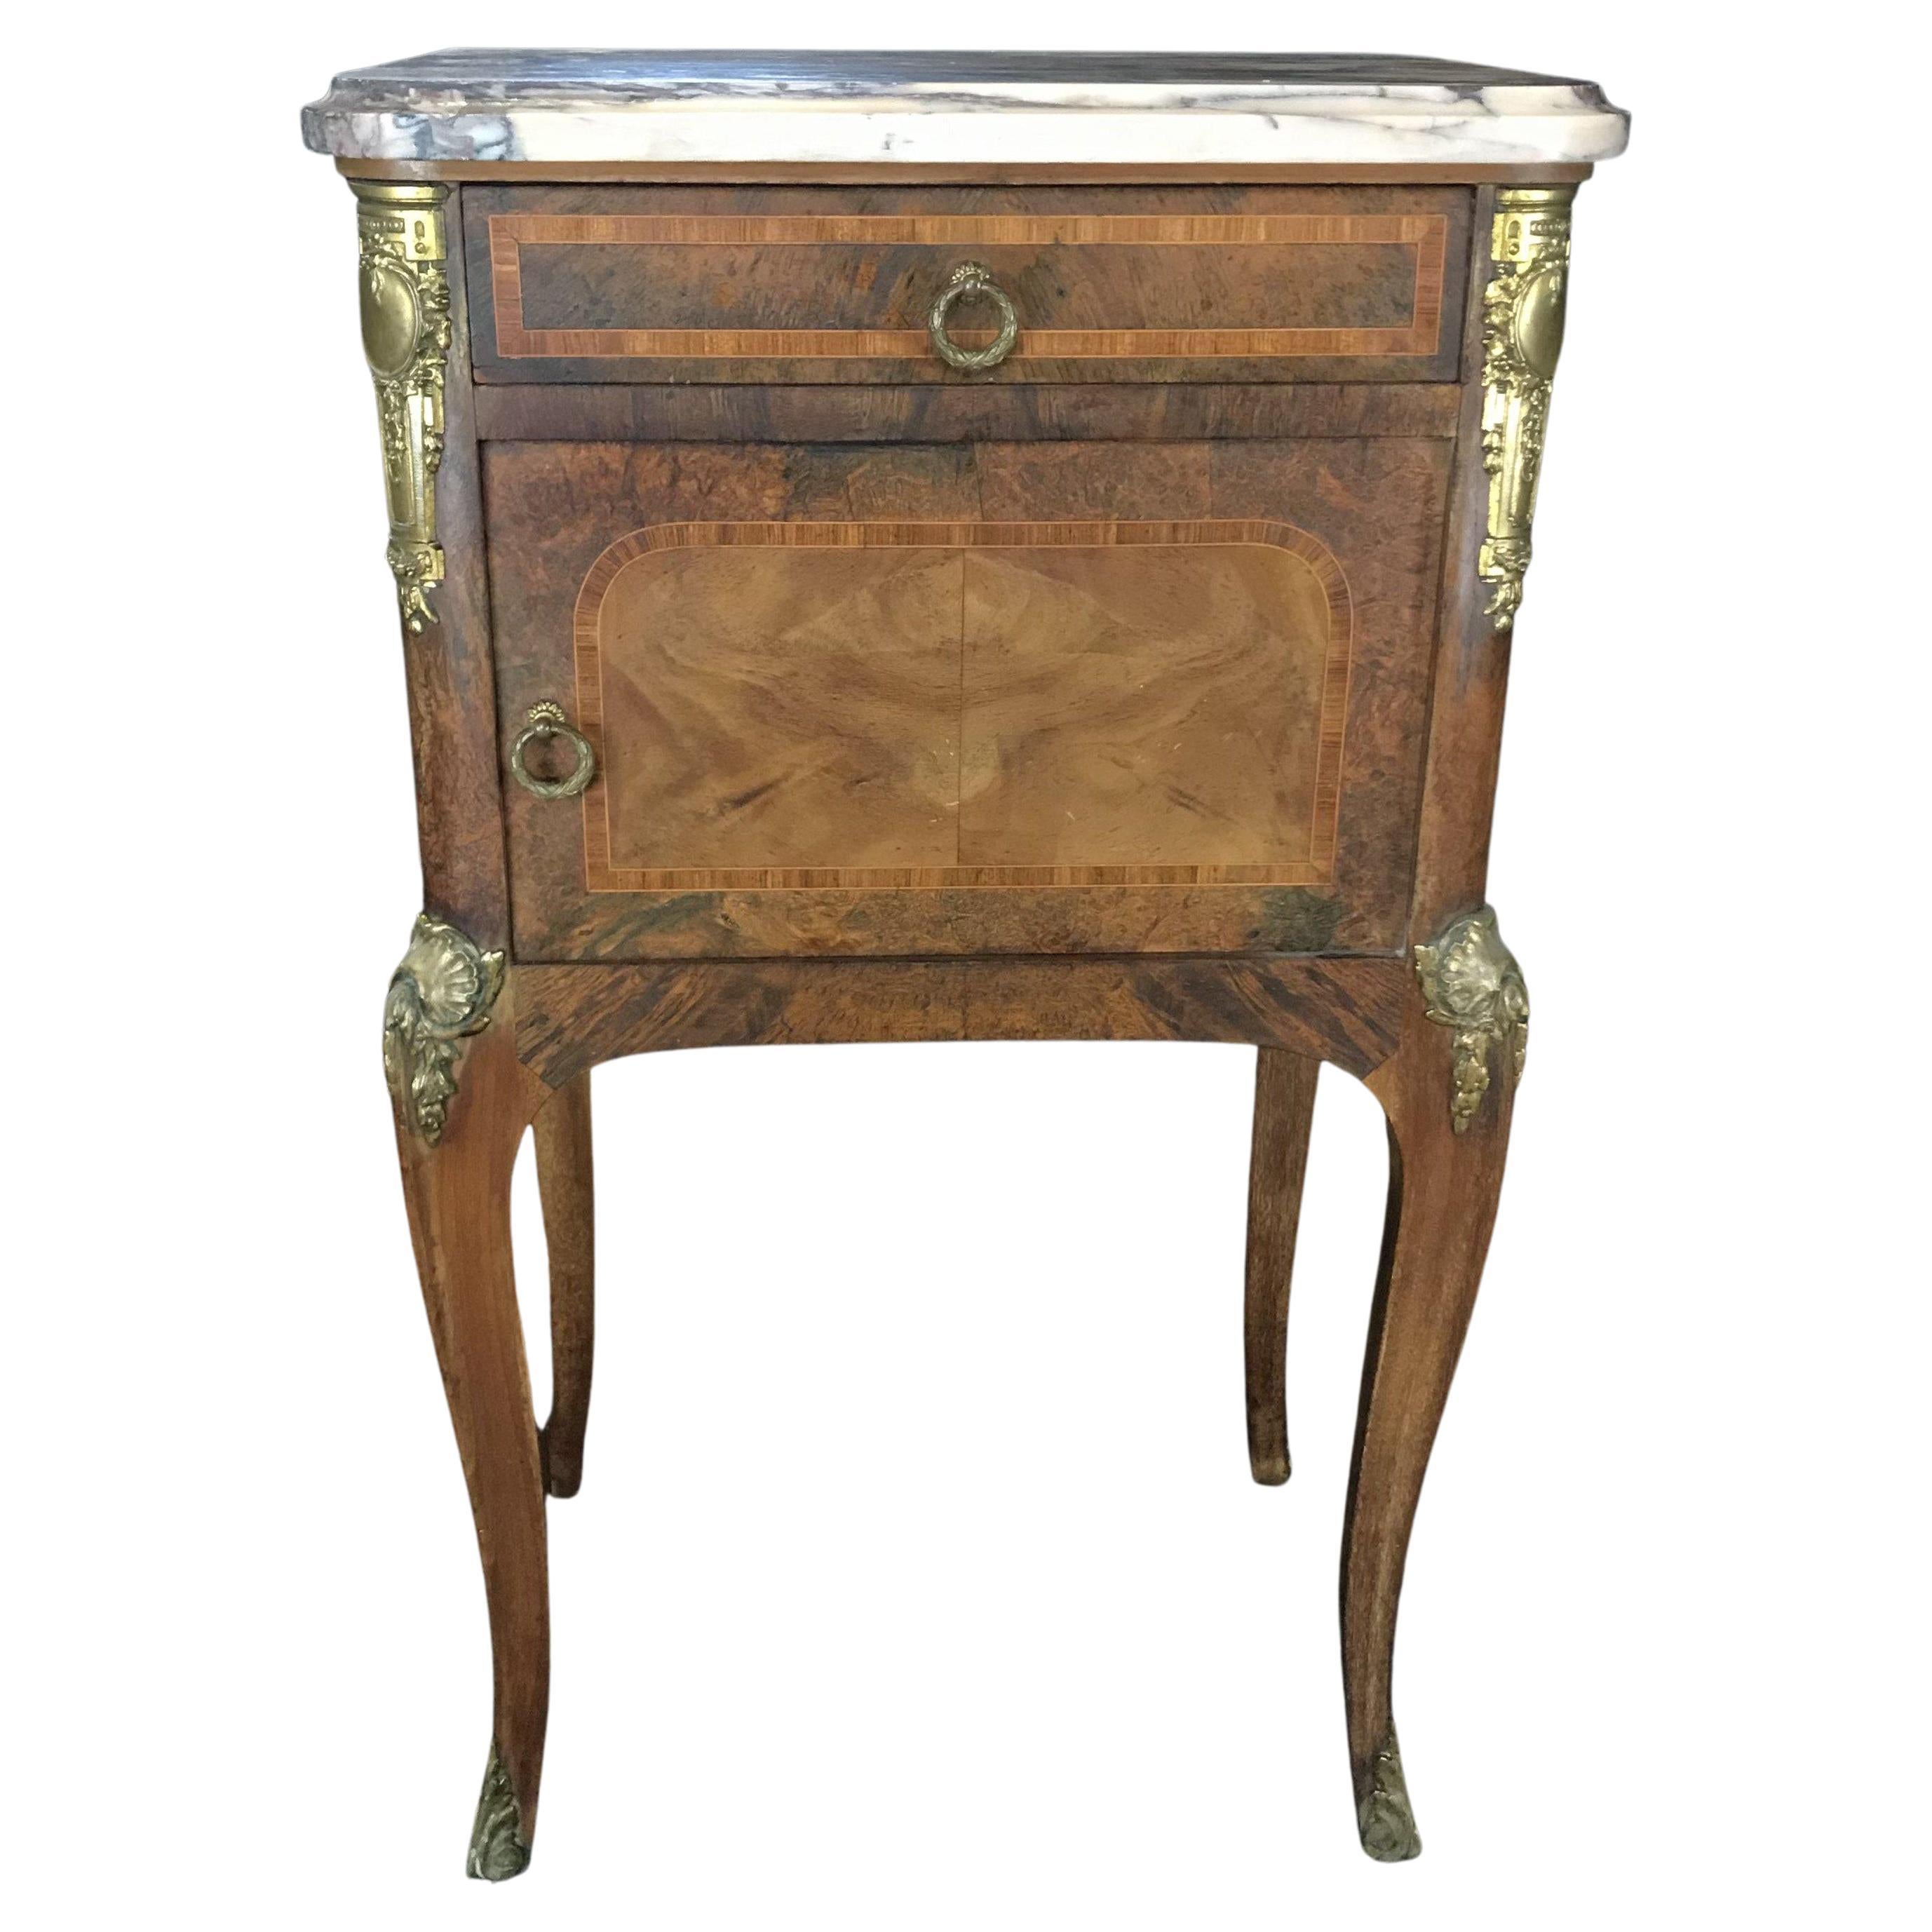 Special French 19th Century Inlaid Marble Top Nightstand or Side Table